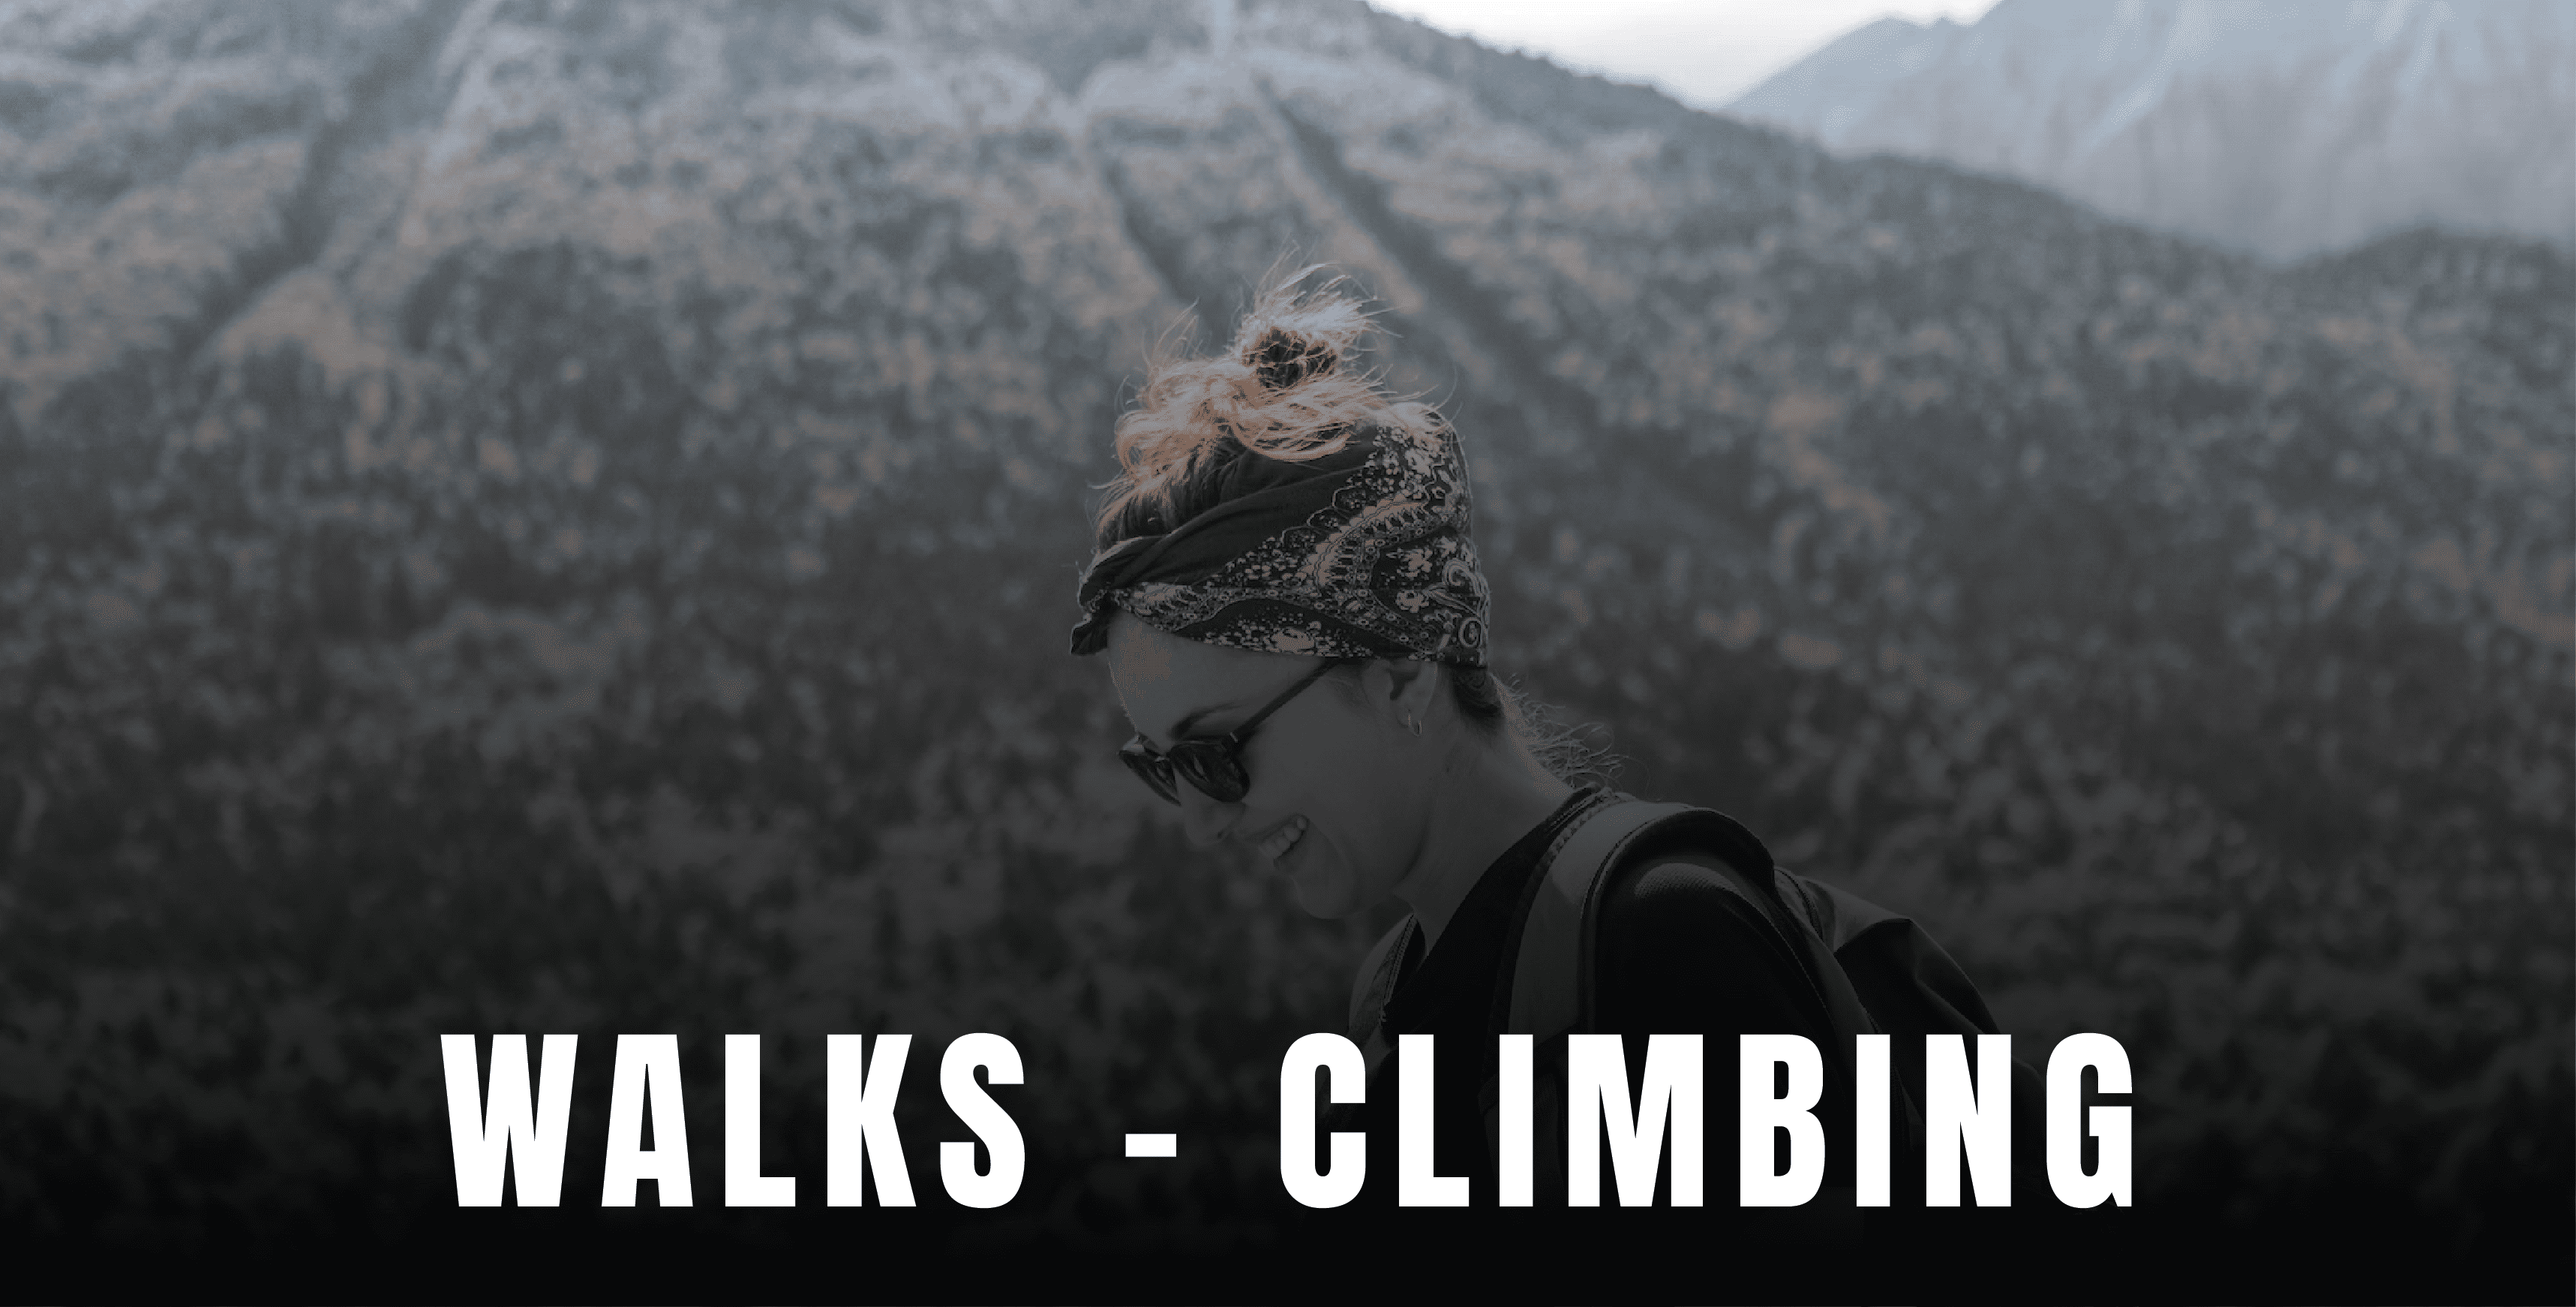 The walks, hikes or to go climbing